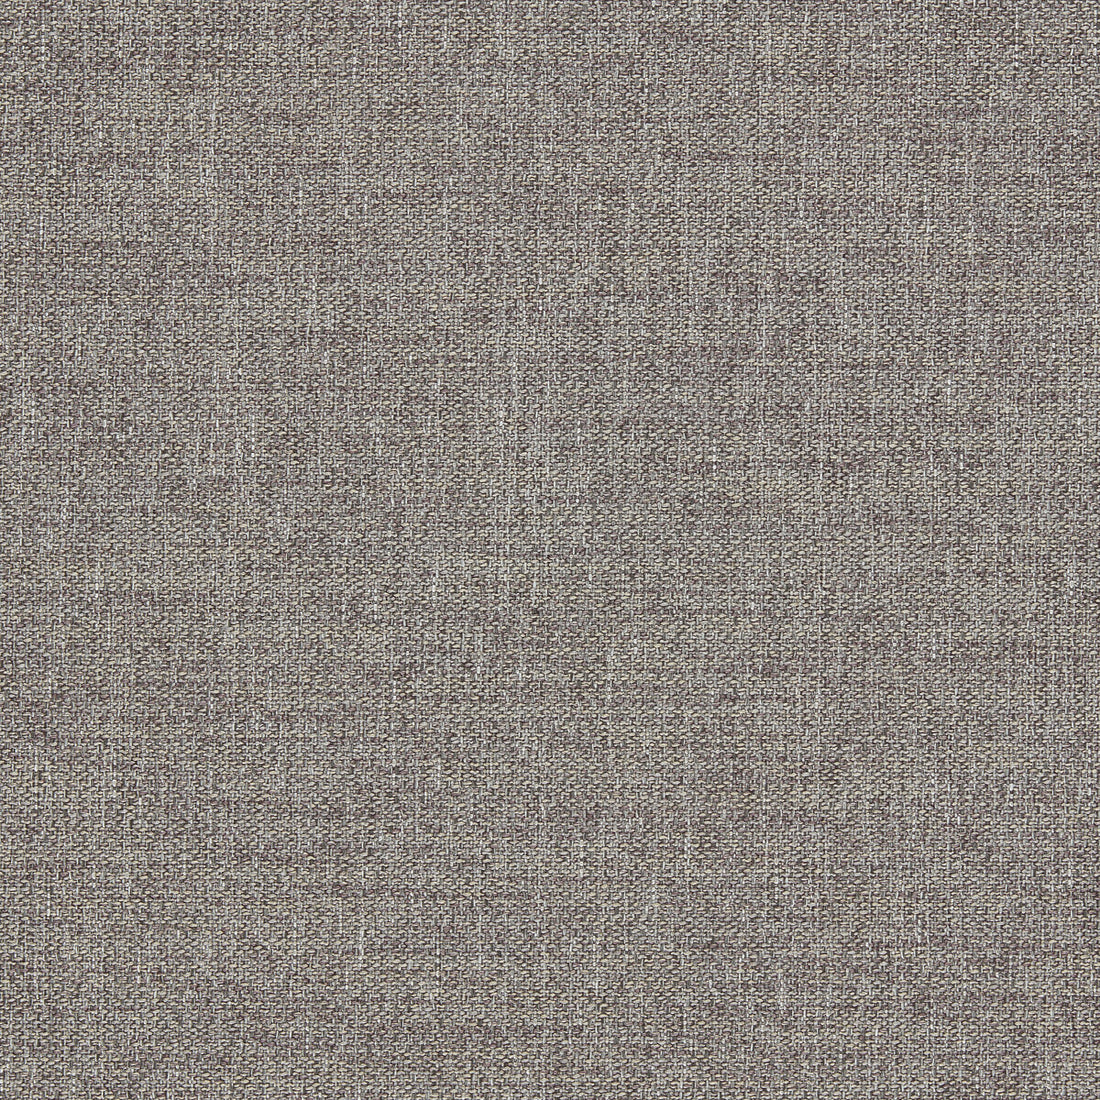 Llanara fabric in heather color - pattern F1422/04.CAC.0 - by Clarke And Clarke in the Clarke &amp; Clarke Purus collection